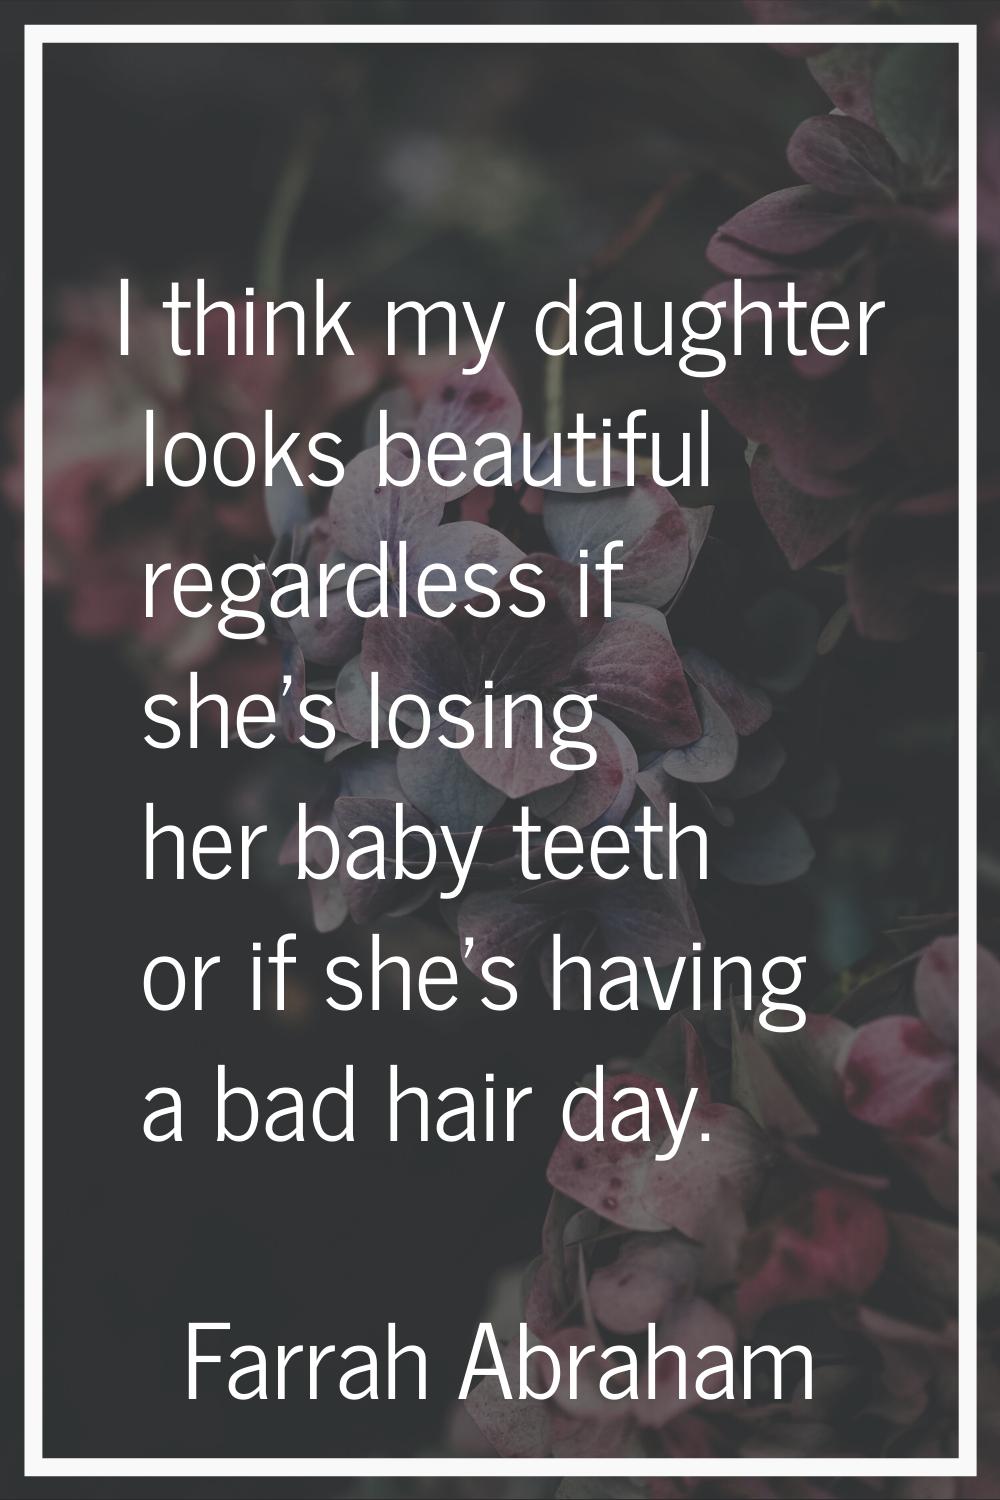 I think my daughter looks beautiful regardless if she's losing her baby teeth or if she's having a 